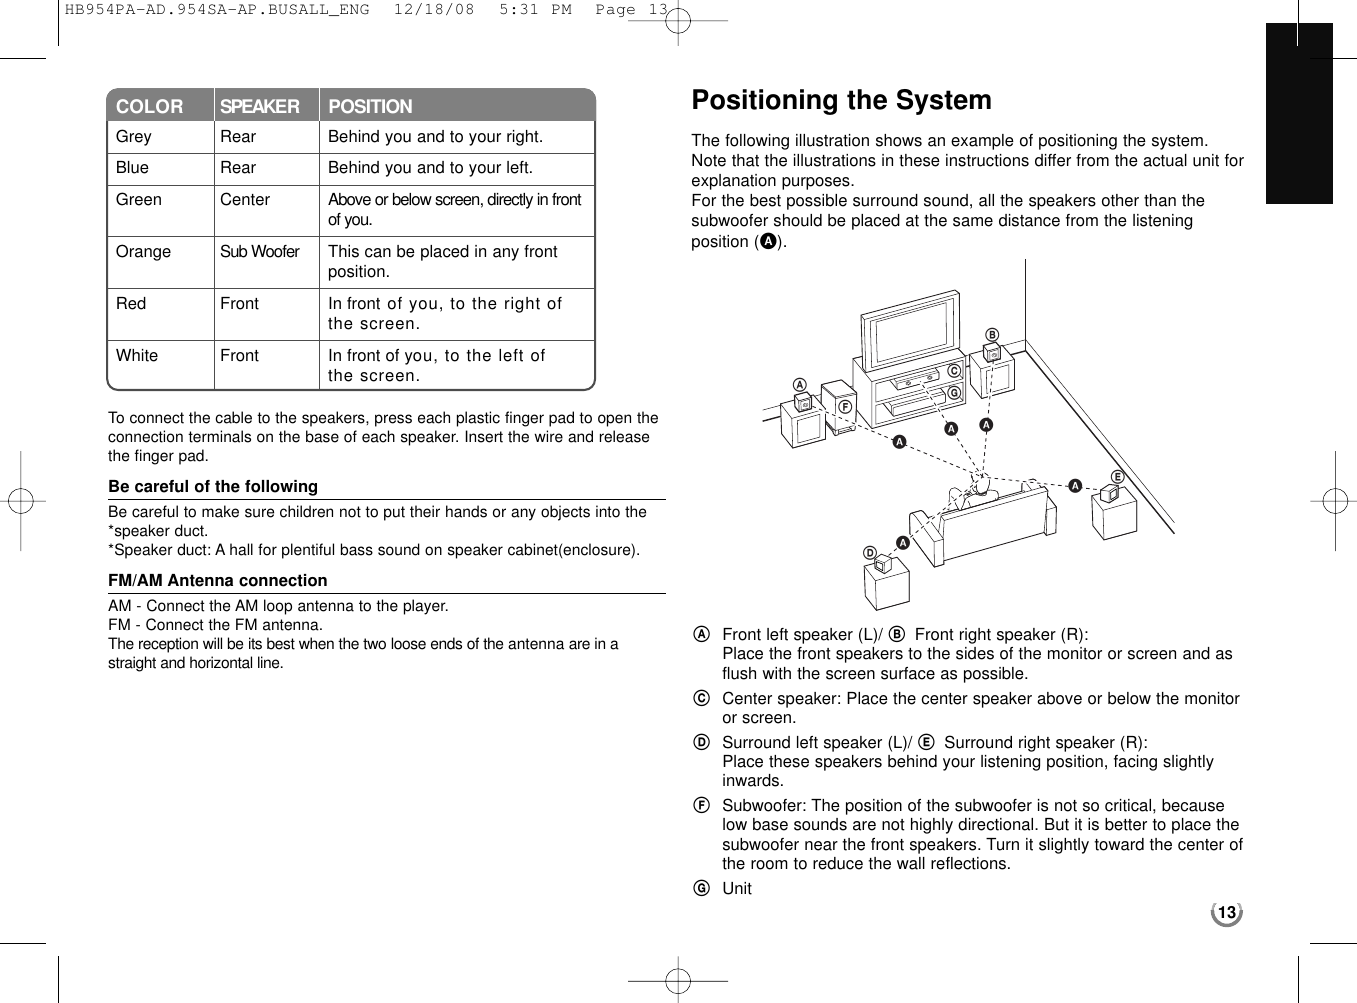 Positioning the SystemThe following illustration shows an example of positioning the system.Note that the illustrations in these instructions differ from the actual unit forexplanation purposes.For the best possible surround sound, all the speakers other than the subwoofer should be placed at the same distance from the listening position (A).13ABDEFAAAAAGCAFront left speaker (L)/ BFront right speaker (R):Place the front speakers to the sides of the monitor or screen and asflush with the screen surface as possible.CCenter speaker: Place the center speaker above or below the monitoror screen.DSurround left speaker (L)/ ESurround right speaker (R): Place these speakers behind your listening position, facing slightlyinwards.FSubwoofer: The position of the subwoofer is not so critical, becauselow base sounds are not highly directional. But it is better to place thesubwoofer near the front speakers. Turn it slightly toward the center ofthe room to reduce the wall reflections.GUnitTo  connect the cable to the speakers, press each plastic finger pad to open theconnection terminals on the base of each speaker. Insert the wire and releasethe finger pad.Be careful of the followingBe careful to make sure children not to put their hands or any objects into the*speaker duct.*Speaker duct: A hall for plentiful bass sound on speaker cabinet(enclosure).FM/AM Antenna connectionAM - Connect the AM loop antenna to the player.FM - Connect the FM antenna.The reception will be its best when the two loose ends of the antenna are in astraight and horizontal line.GreyBlueGreenOrangeRedWhiteRearRearCenterSub WooferFrontFrontBehind you and to your right.Behind you and to your left.Above or below screen, directly in frontof you.This can be placed in any frontposition.In front of you, to the right ofthe screen.In front of you, to the left of the screen.POSITIONSPEAKERCOLORHB954PA-AD.954SA-AP.BUSALL_ENG  12/18/08  5:31 PM  Page 13